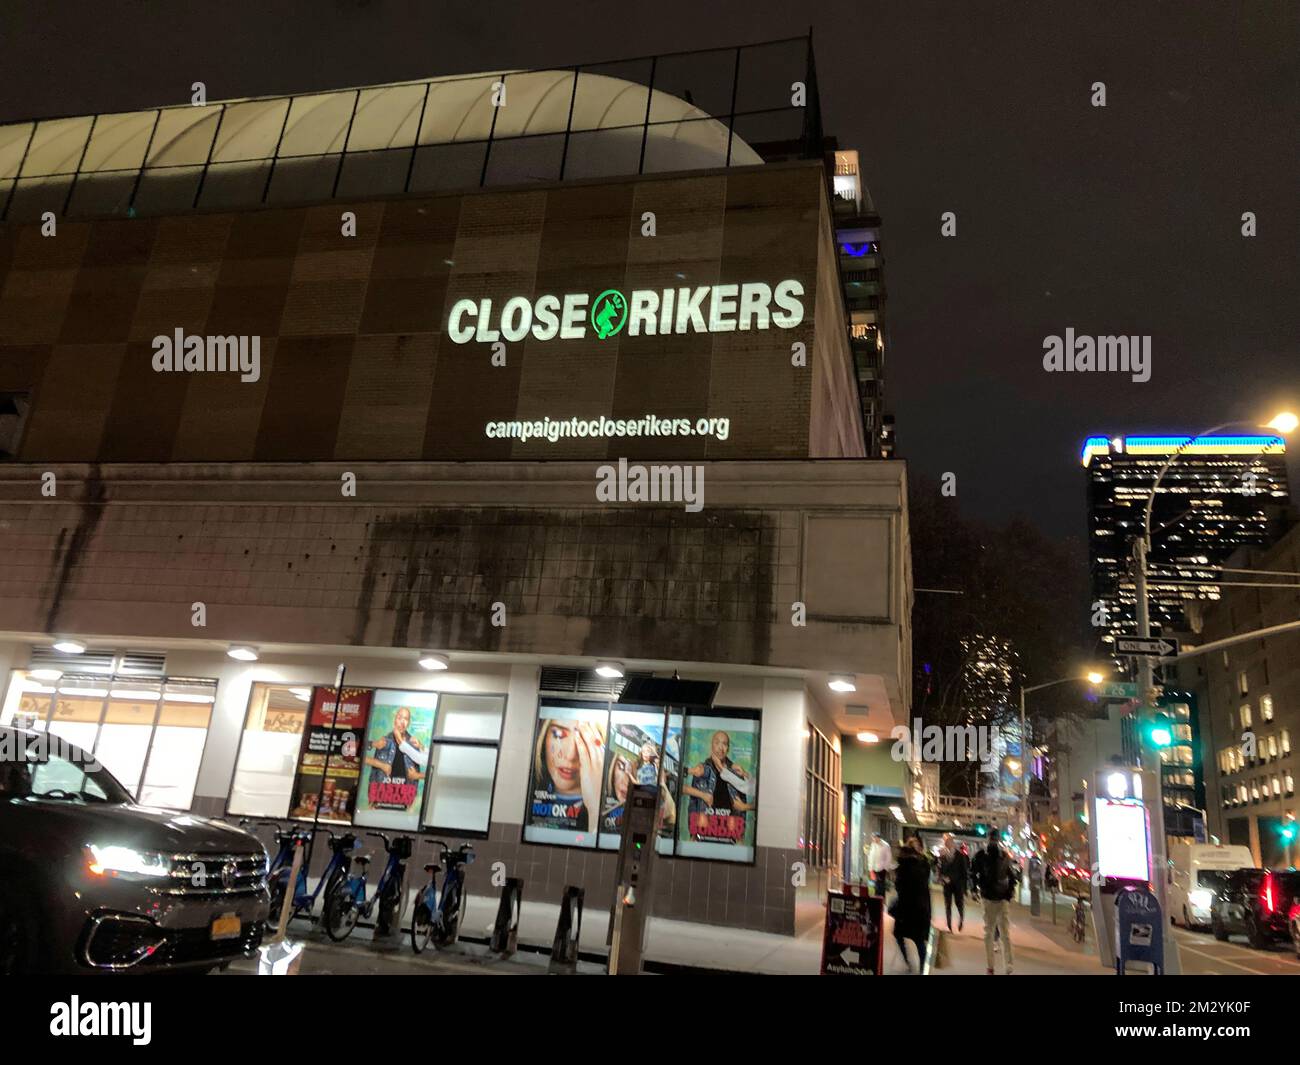 Projection on the side of a building in Chelsea on Thursday, December 8, 2022 promotes the closing of New York City’s Rikers Island detention facility. (© Frances M. Roberts) Stock Photo